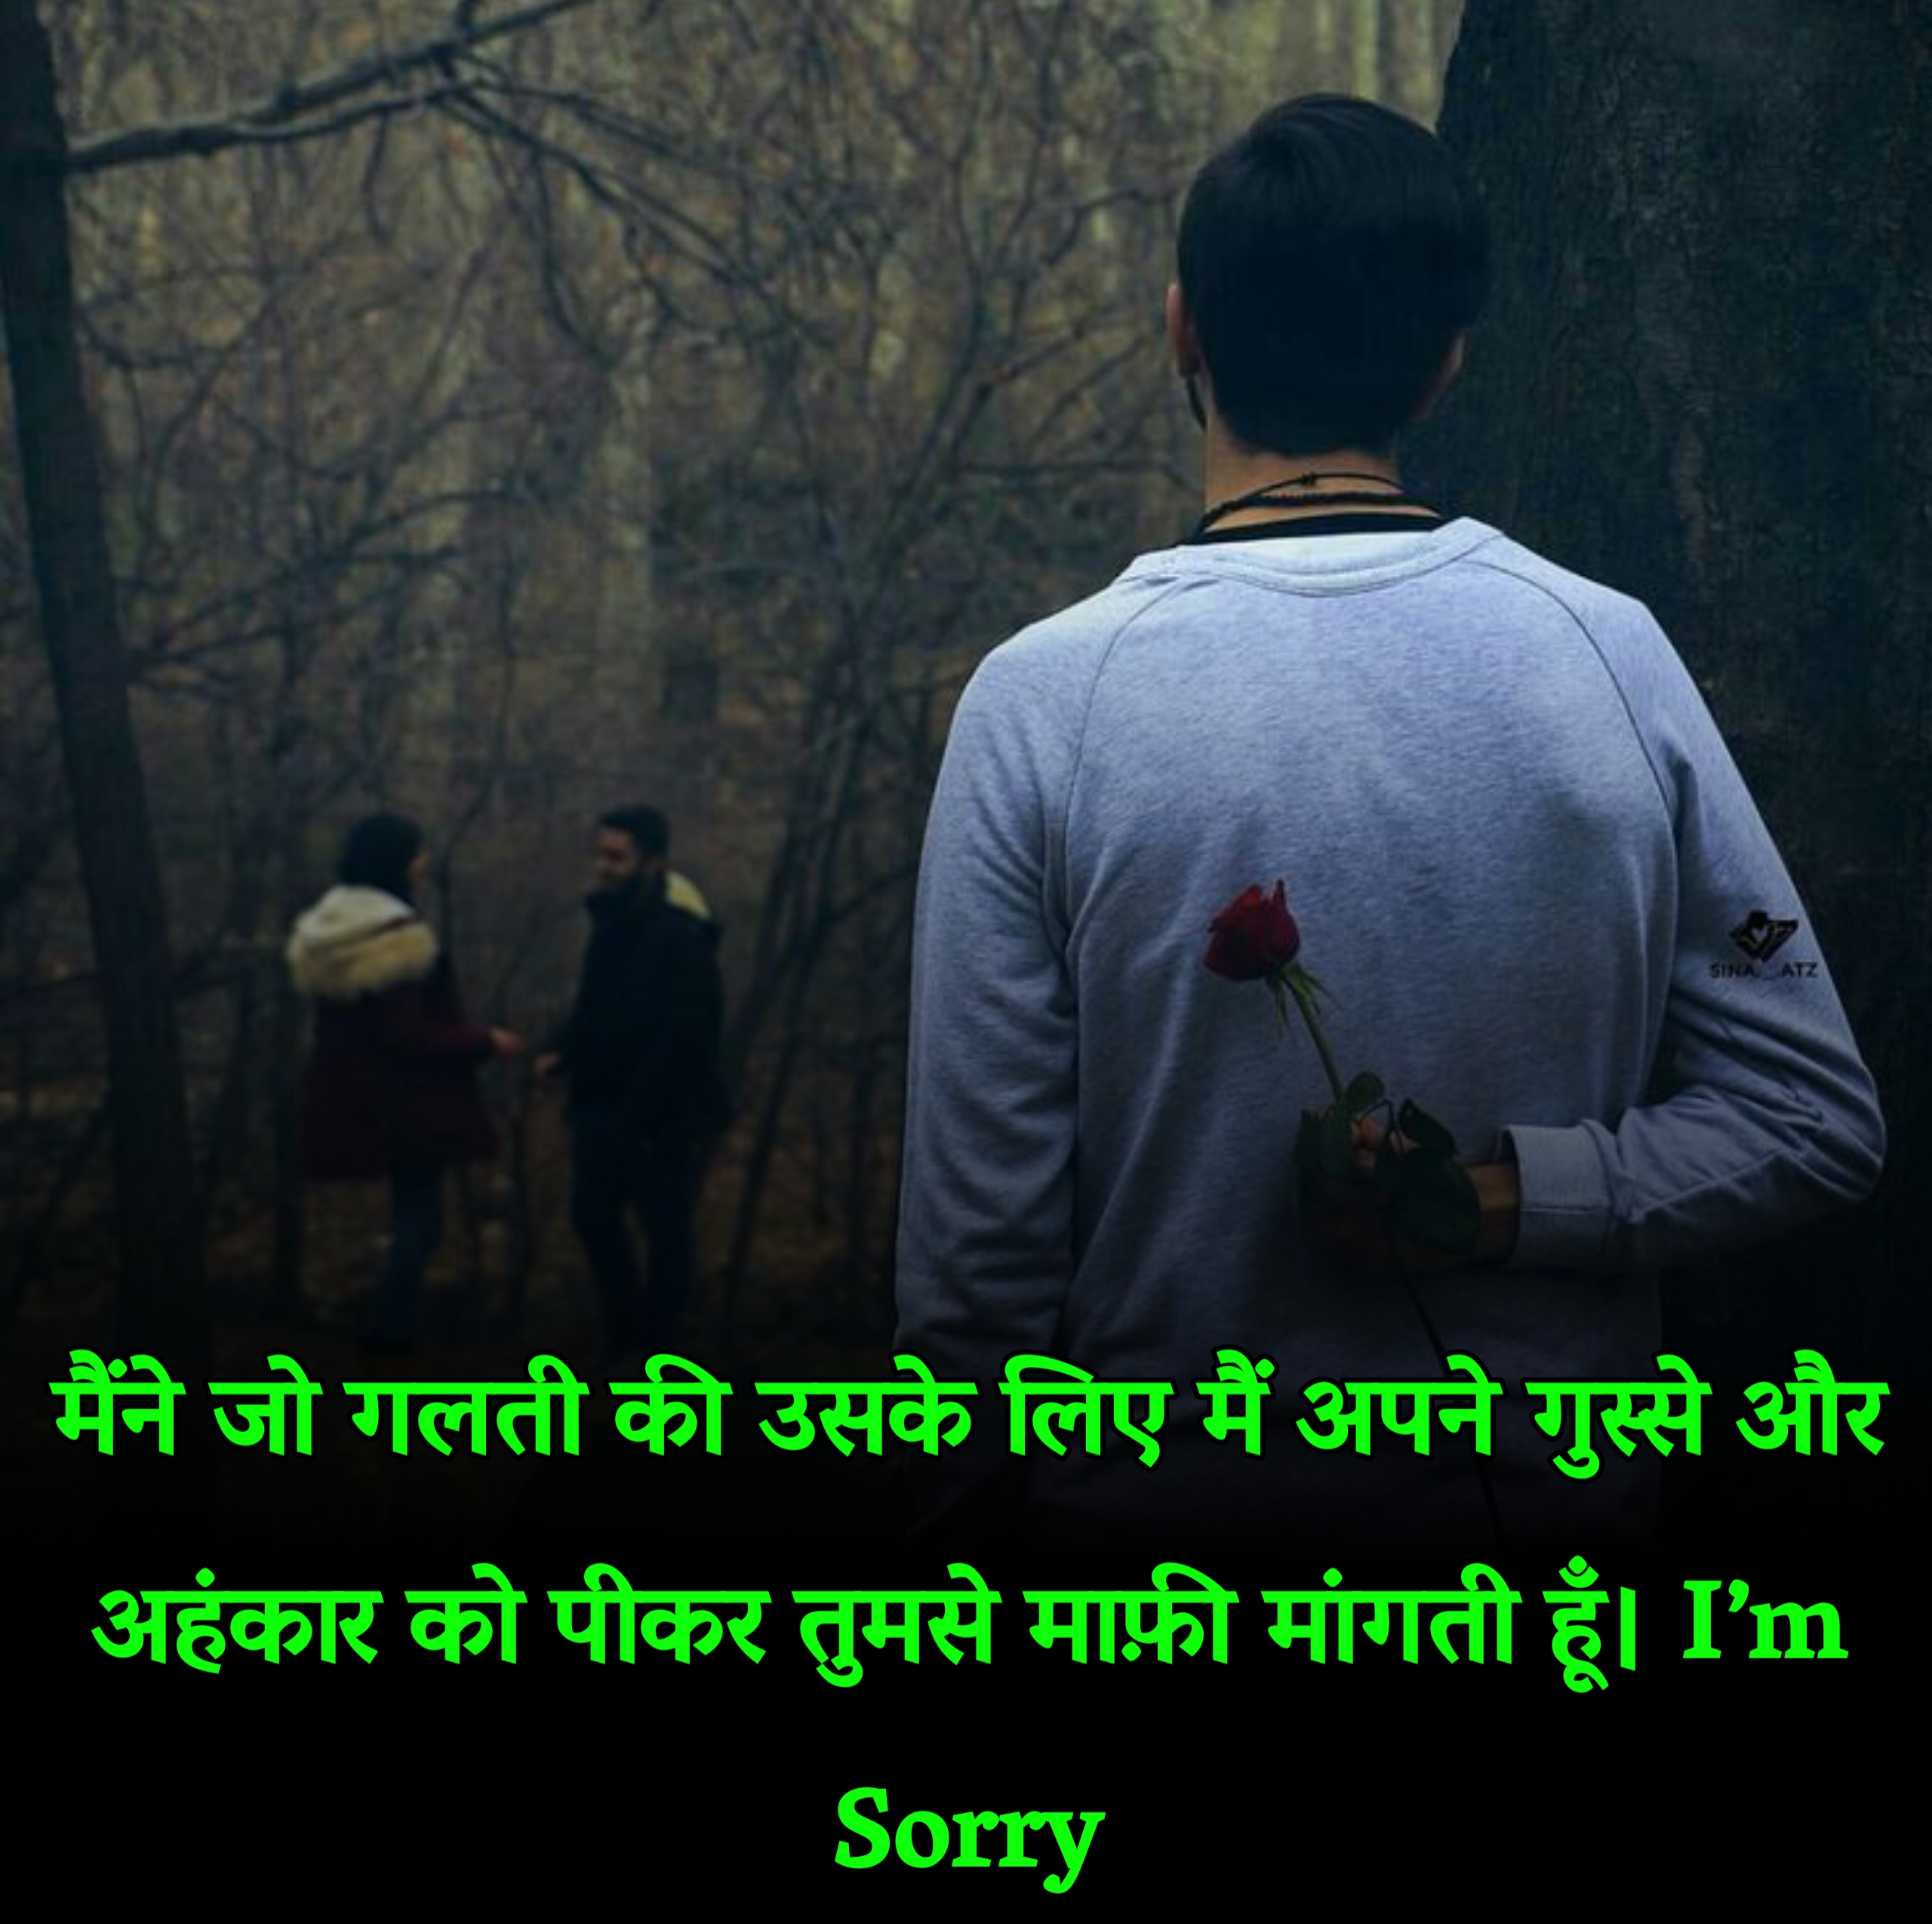 sorry quotes in Hindi | सॉरी कोट्स इन हिंदी 2023,heart touching sorry quotes in hindi,sorry quotes for love,relationship sorry quotes,sorry quotes for best friend,sorry quotes for husband